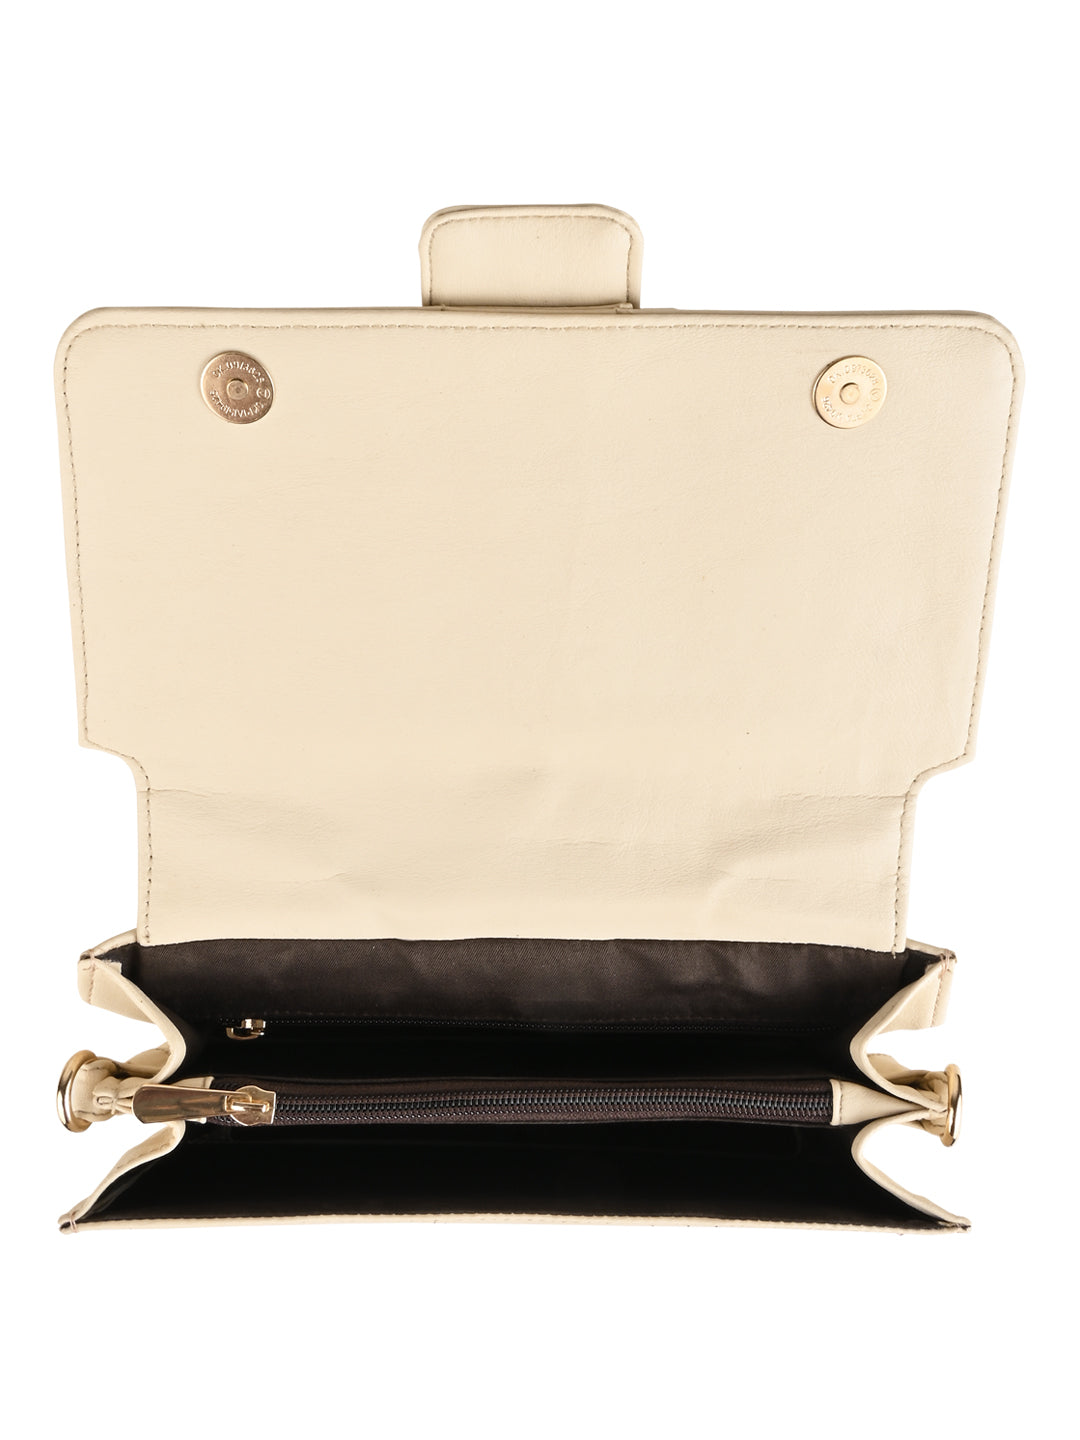 The inside of a black pop badges belt sling bag with compartments and a gold clasp made of PU material, Vdesi.